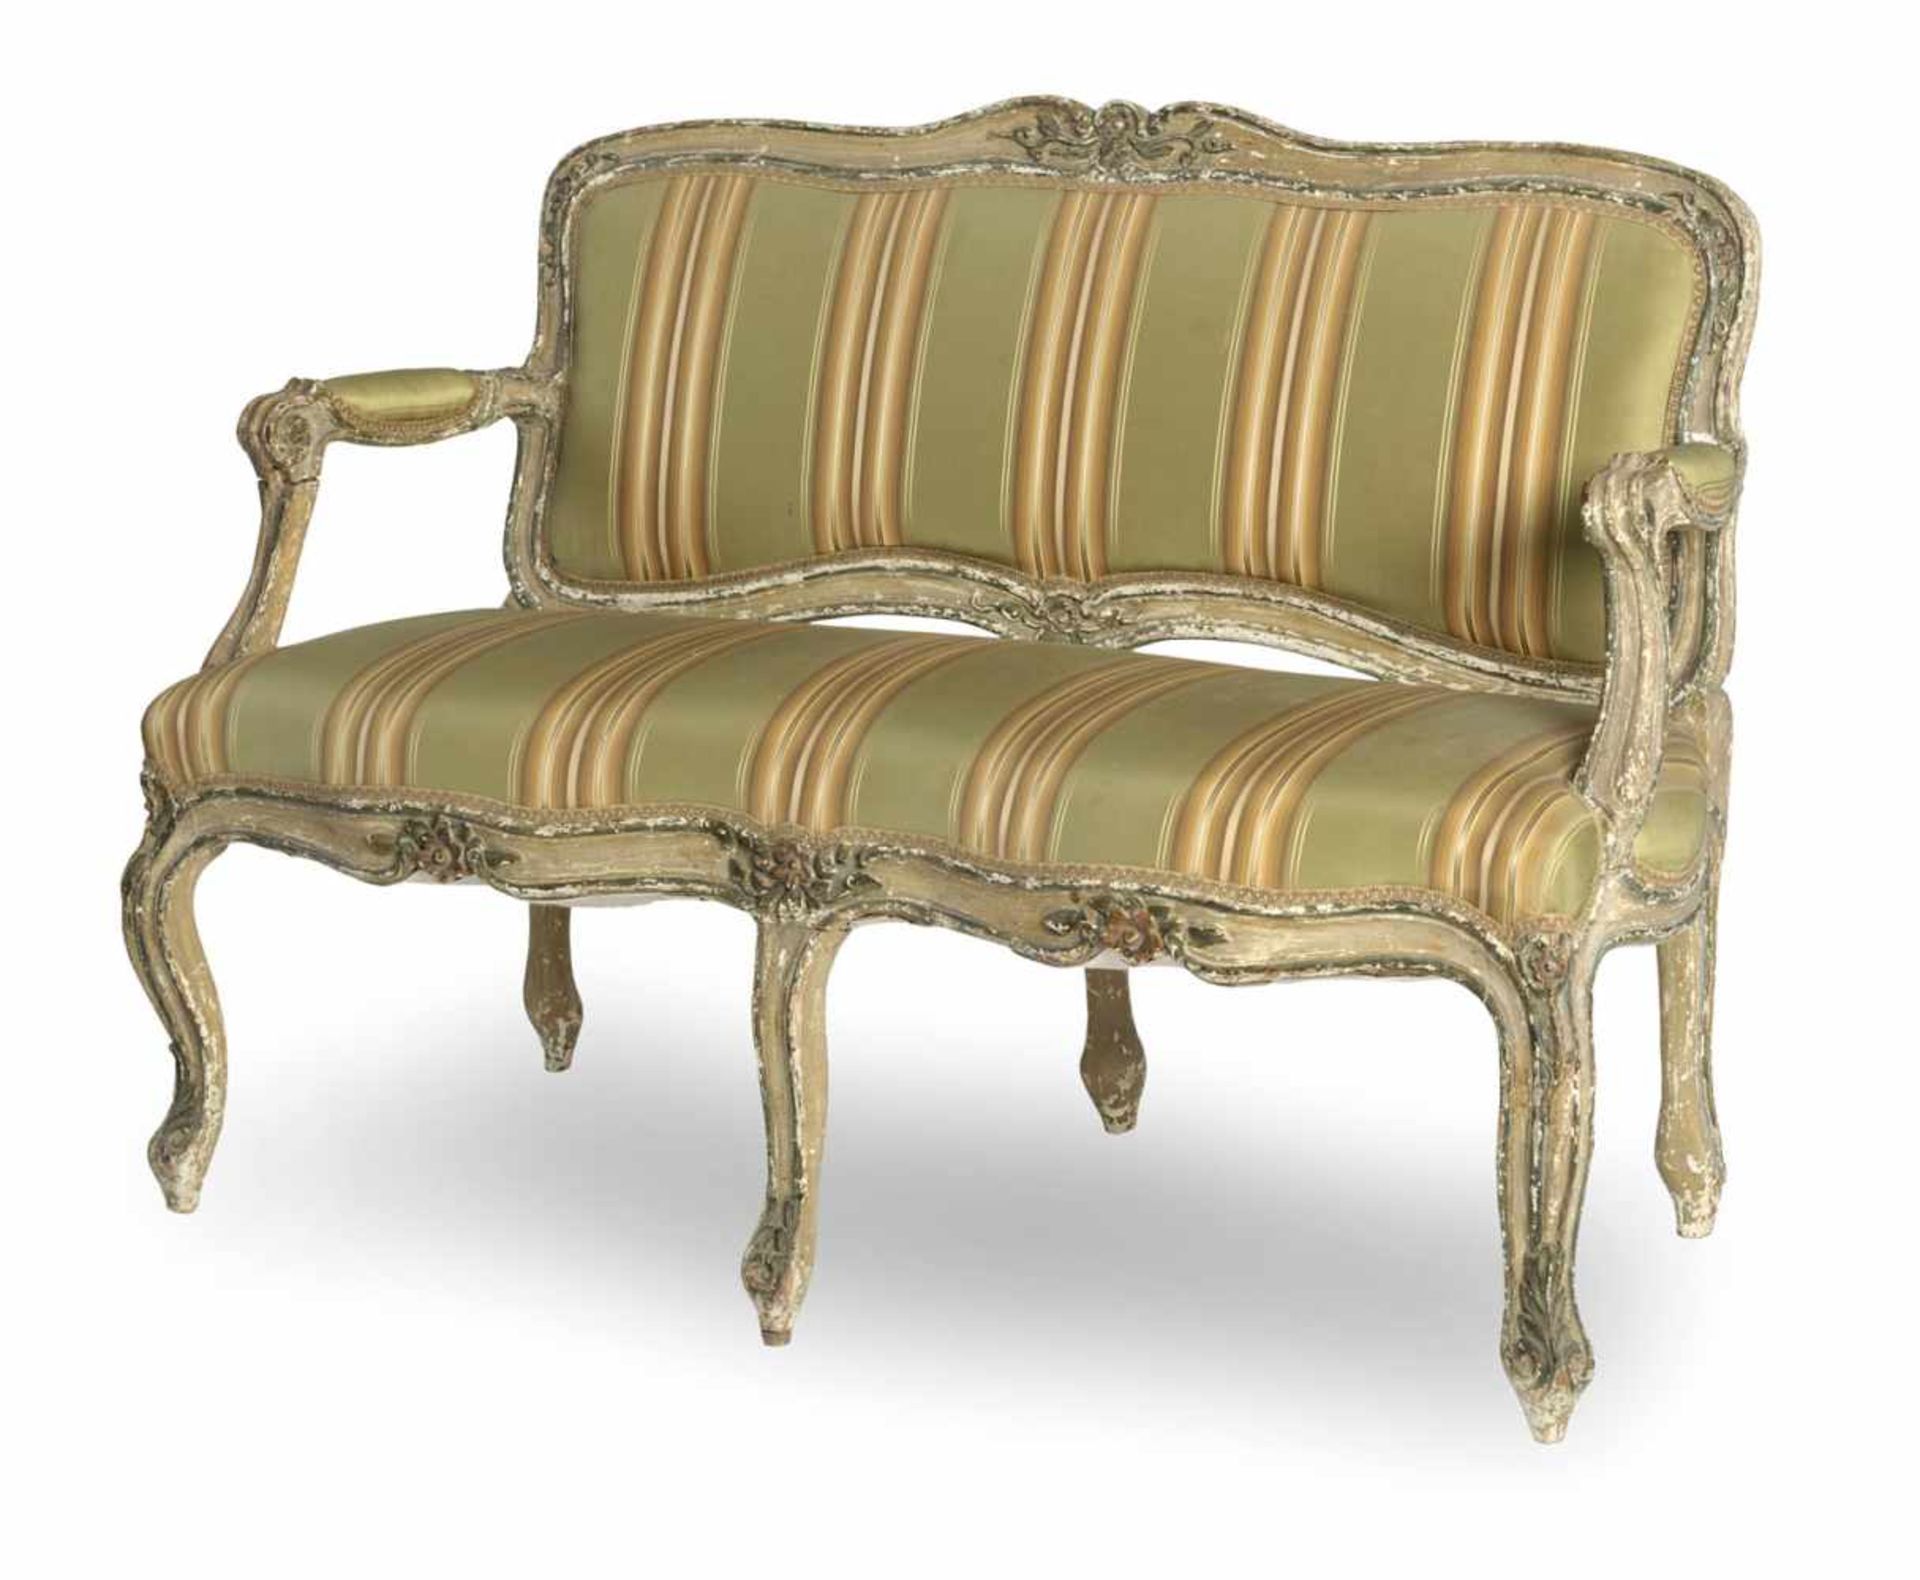 A small Rococo carved and polychrome painted settee, Italy, 18th ct. Rest. Signs of aging.